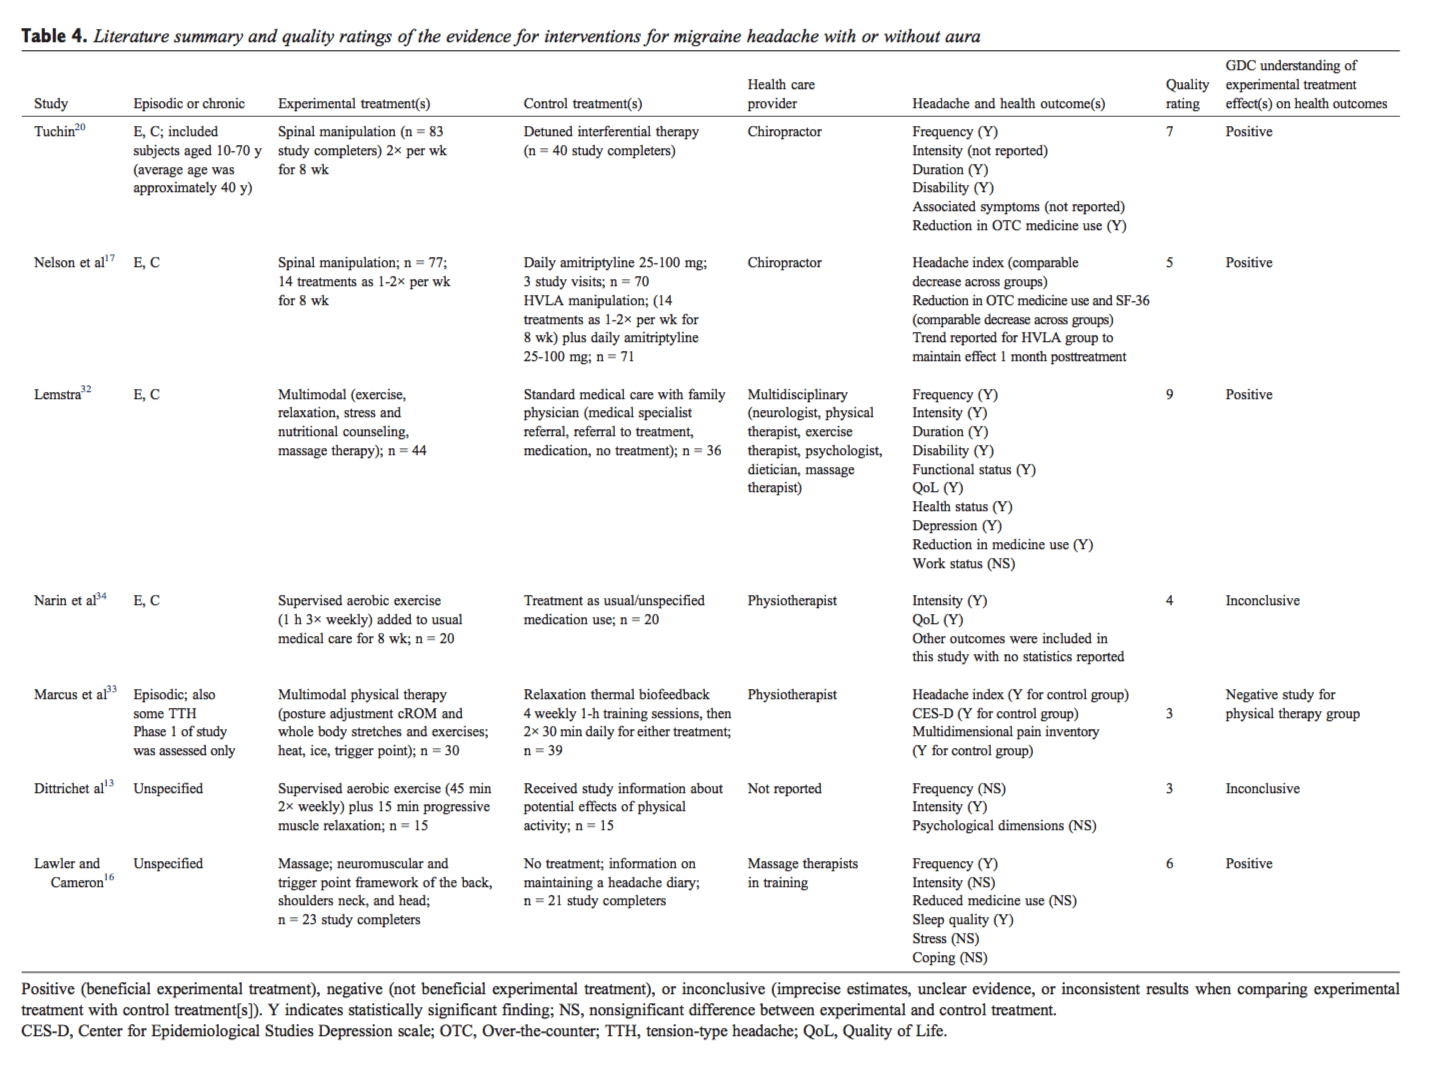 Table 4 Literature Summary of !uality Ratings of the Evidence for Interventions for Migraine Headache with or without Aura